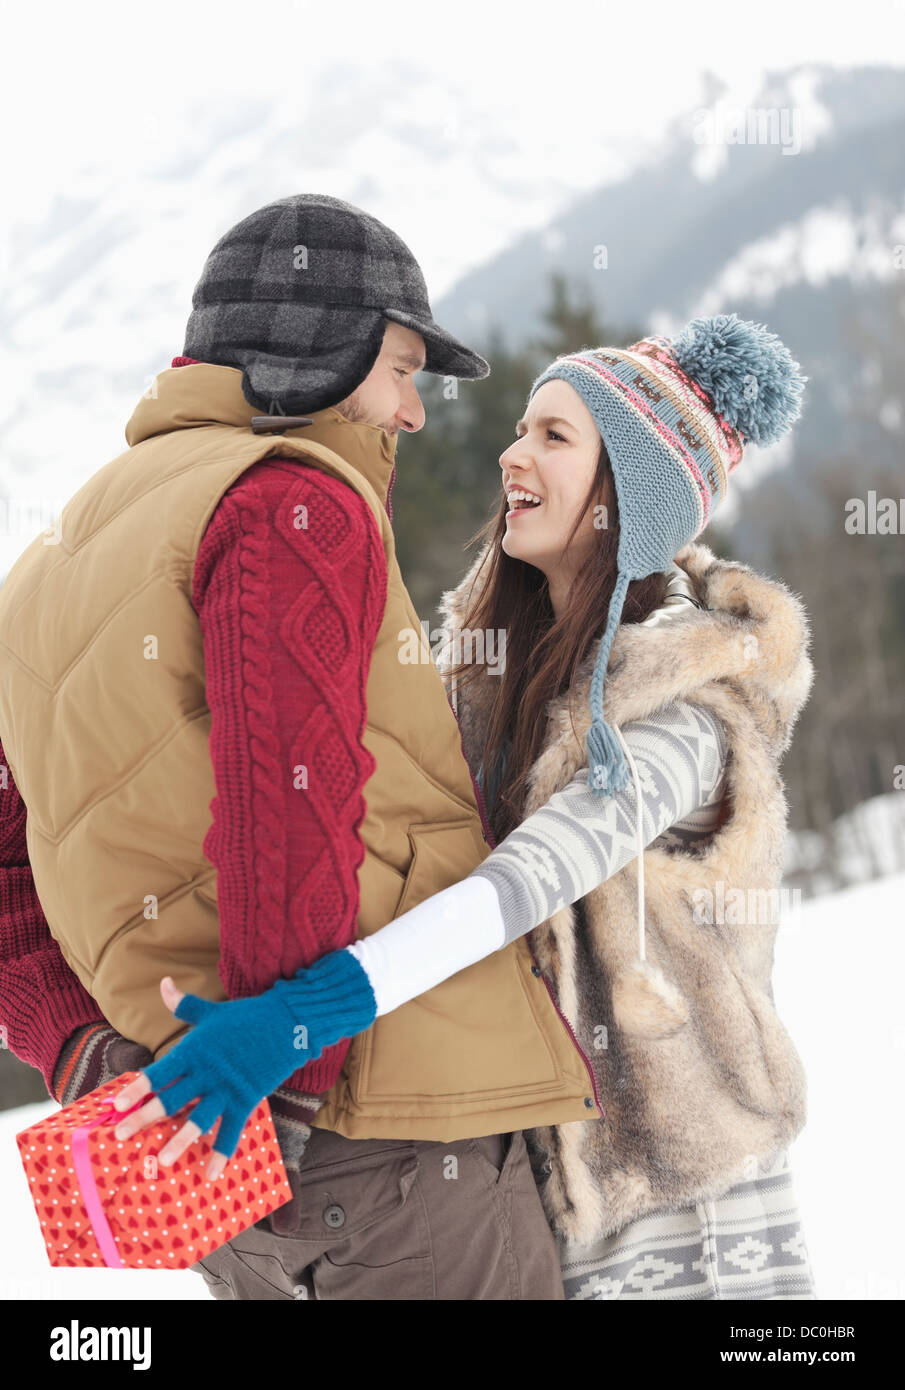 Woman reaching for Christmas gift behind man's back in snowy field Stock Photo